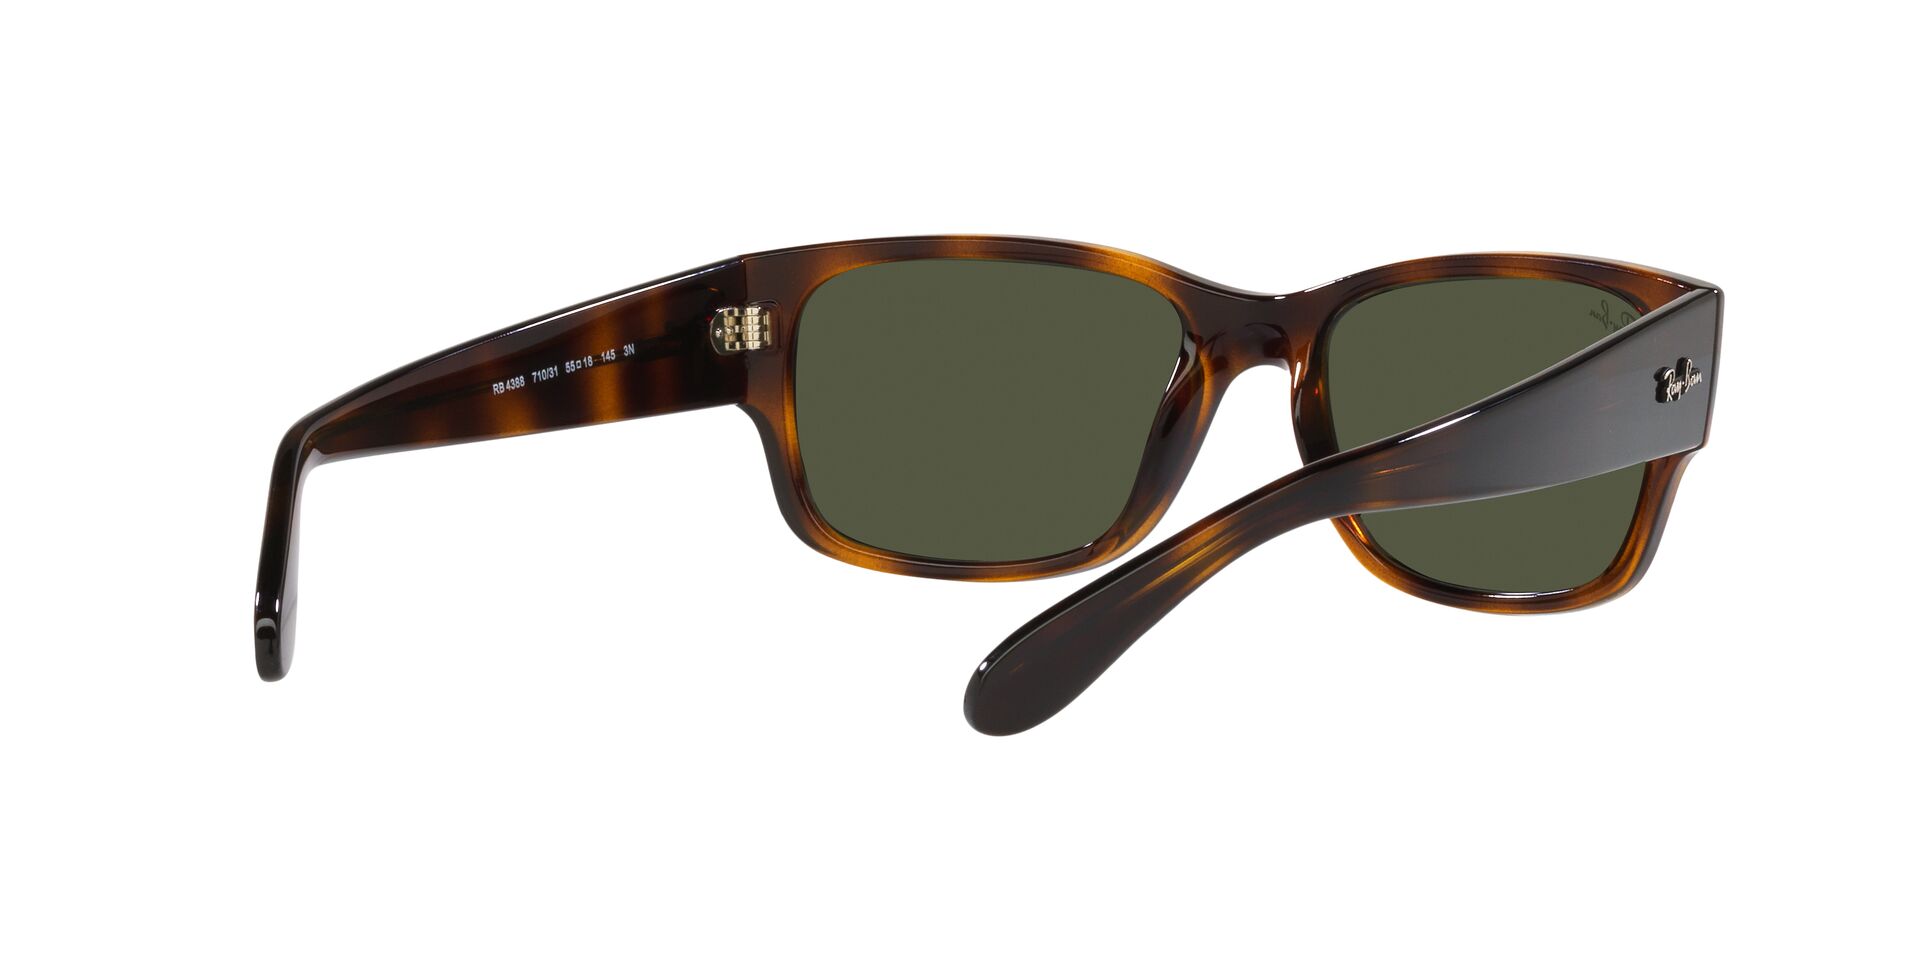 Buy Core Sunglasses Online at Ray-Ban